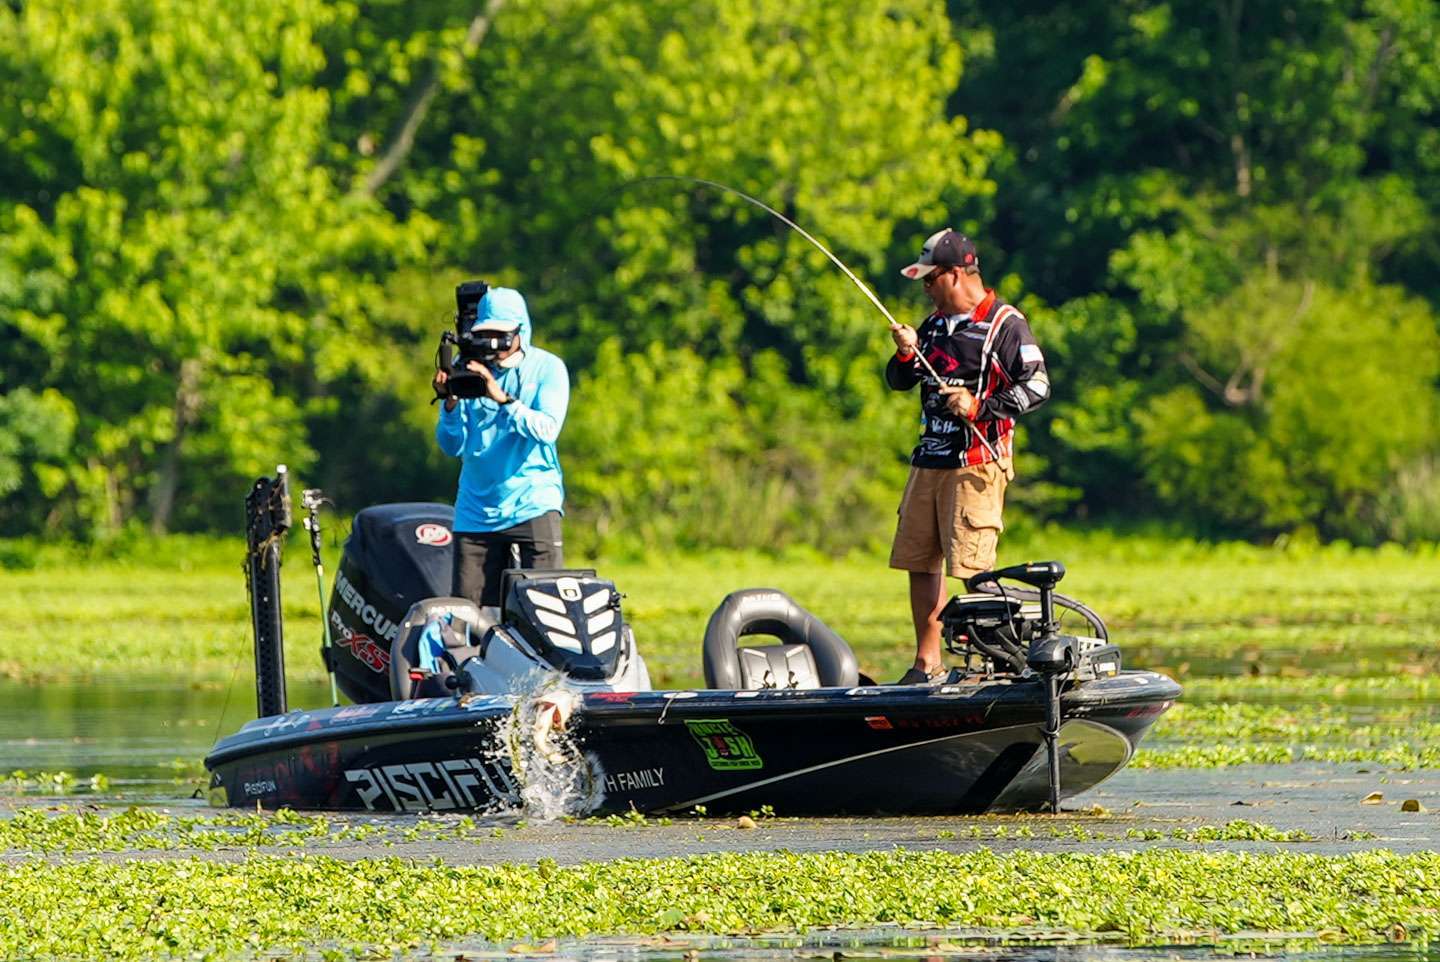 That angler was Caleb Kuphall, whose winning weight of 85 pounds, 14 ounces included an impressive scorecard. The Wisconsin pro racked up limits weighing 27-10, 15-10, 23-9 and 19-1, for an impressive 17-4 winning margin over second place. 
